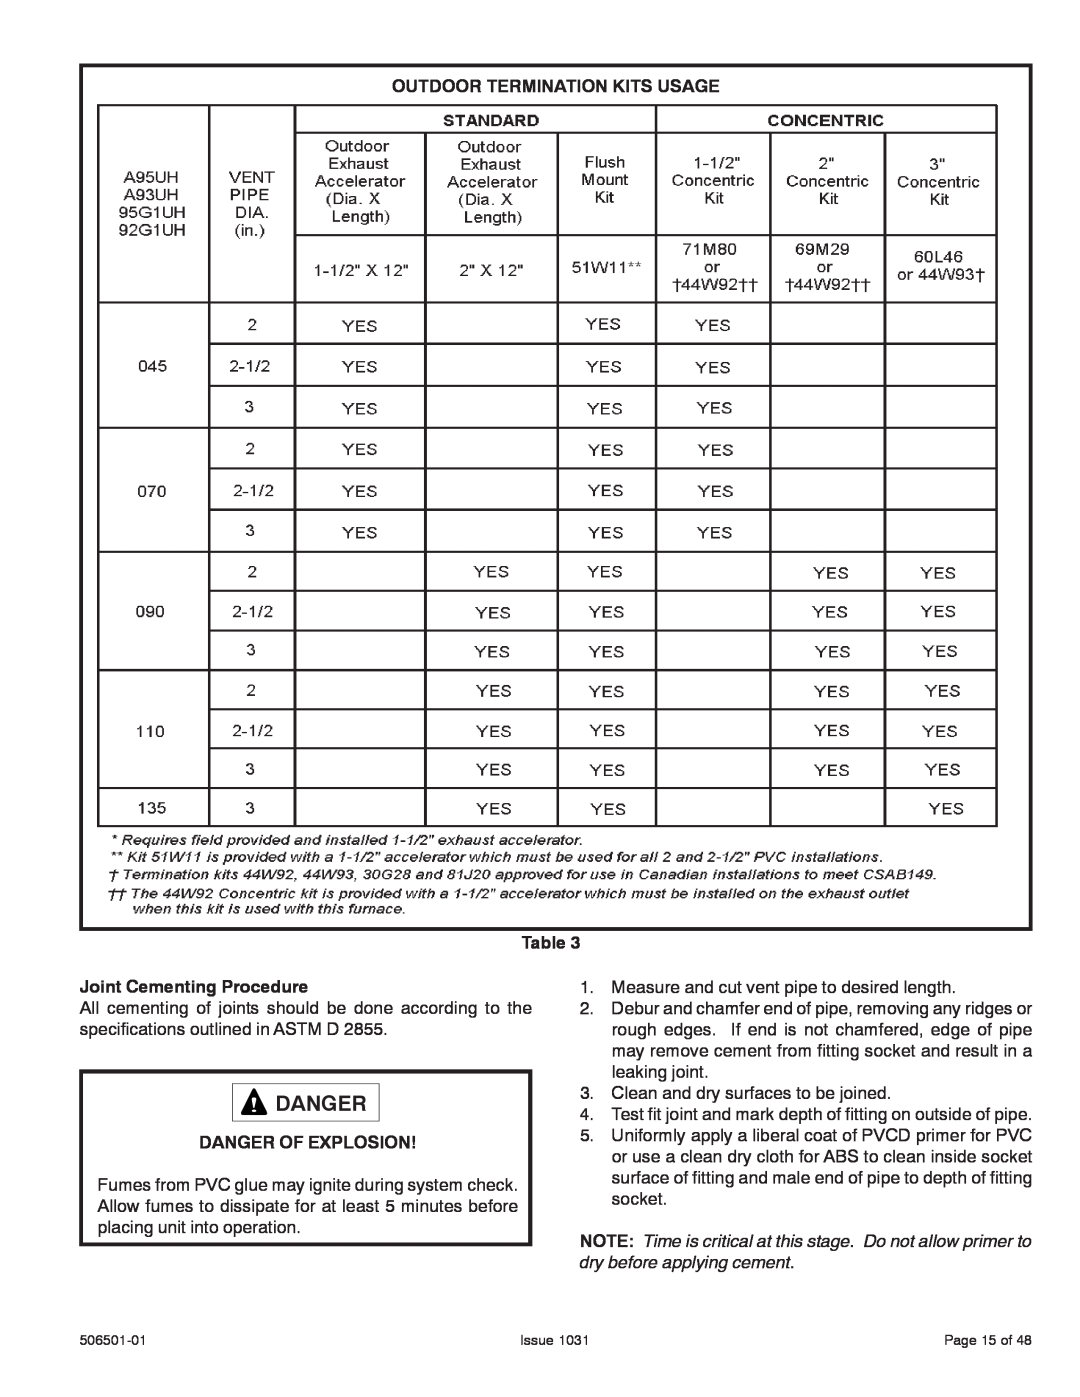 Allied Air Enterprises 92G1UH OUTDOOR TERMINATION KITS USAGE Table, Joint Cementing Procedure, Danger Of Explosion 